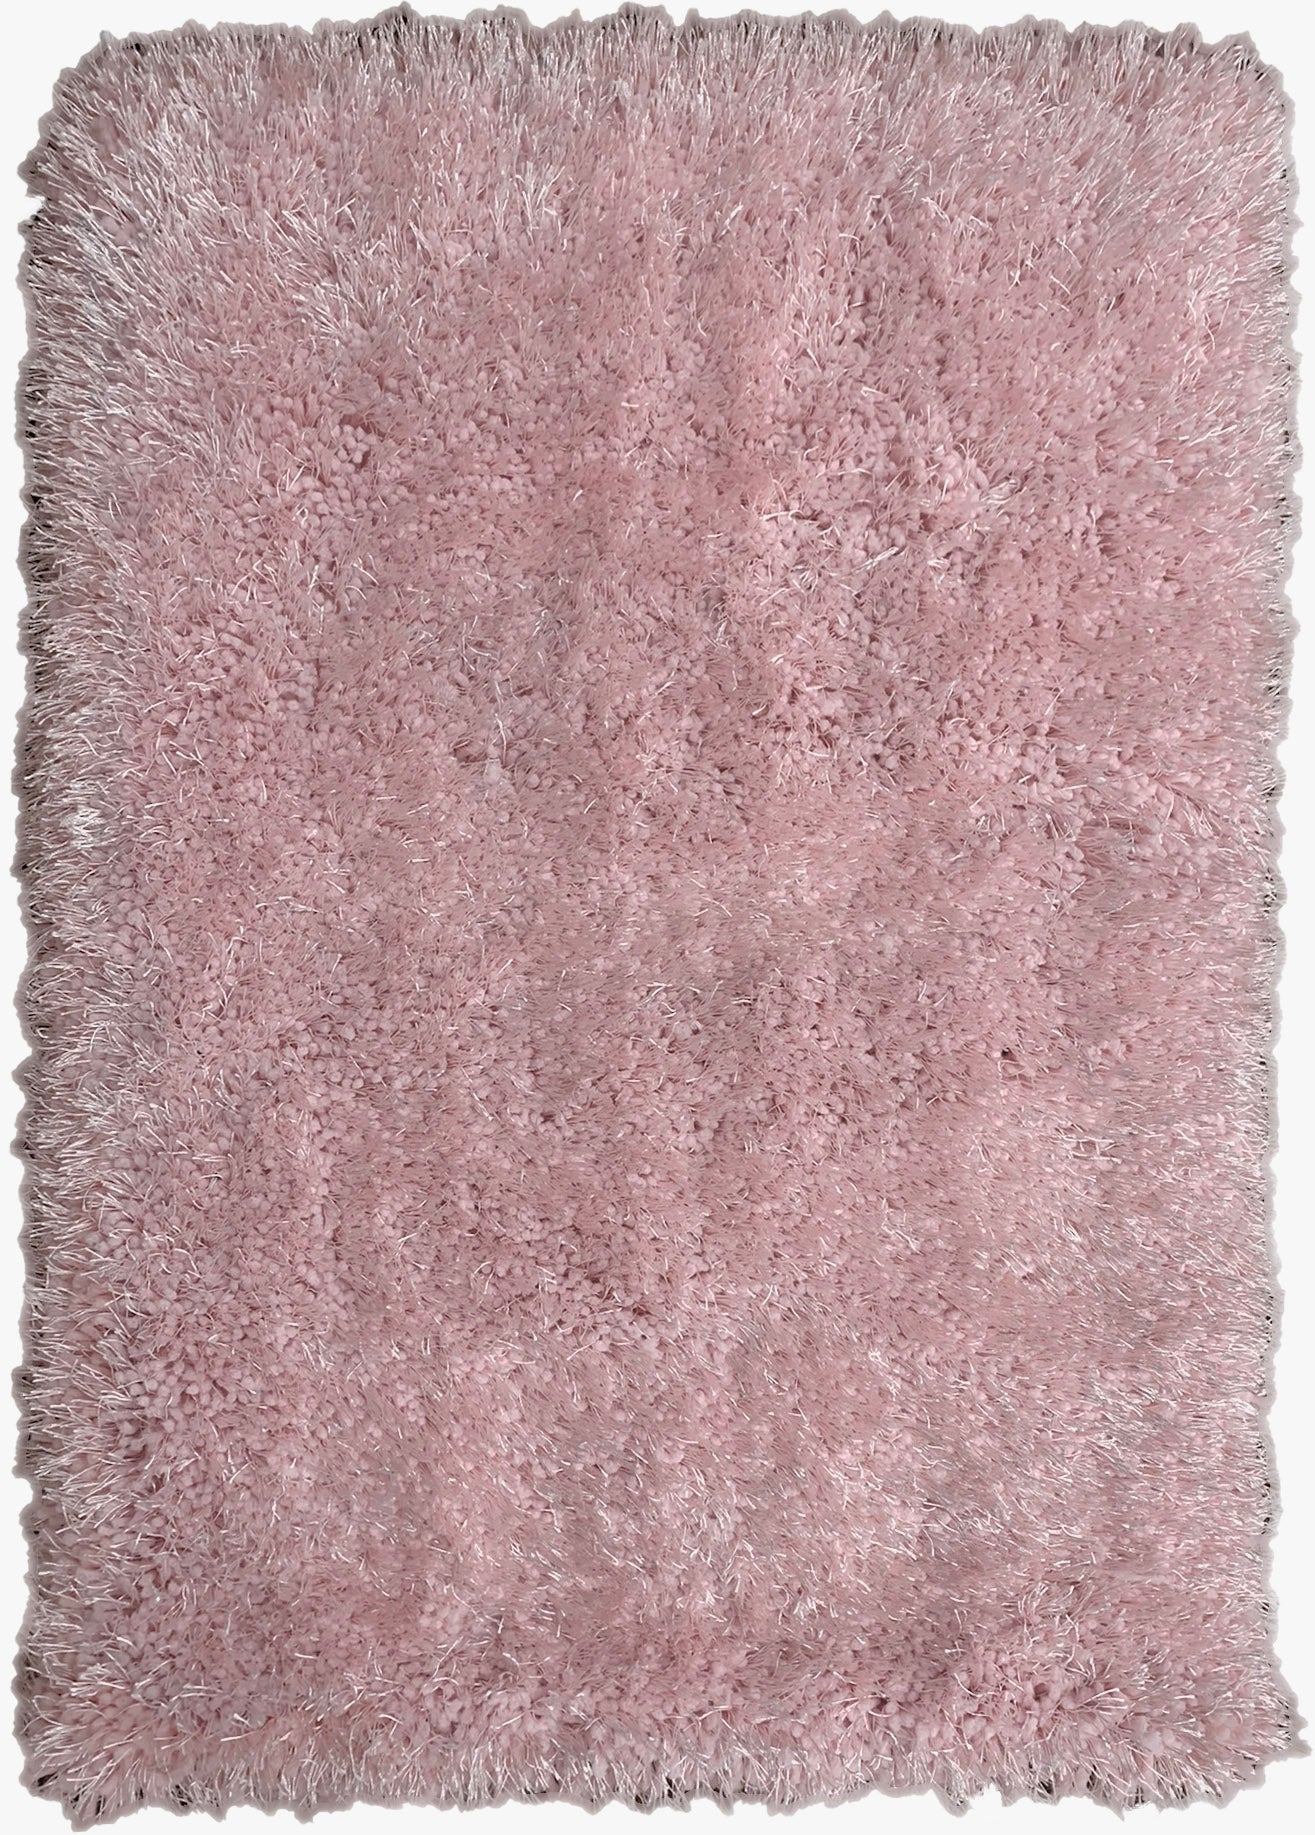 Pale Or Dusty Pink Solid Shag Area Rug/Carpet - Crafted from 100% Polyester, Plush Fluffy Shine, Thick and Thin Yarns Design